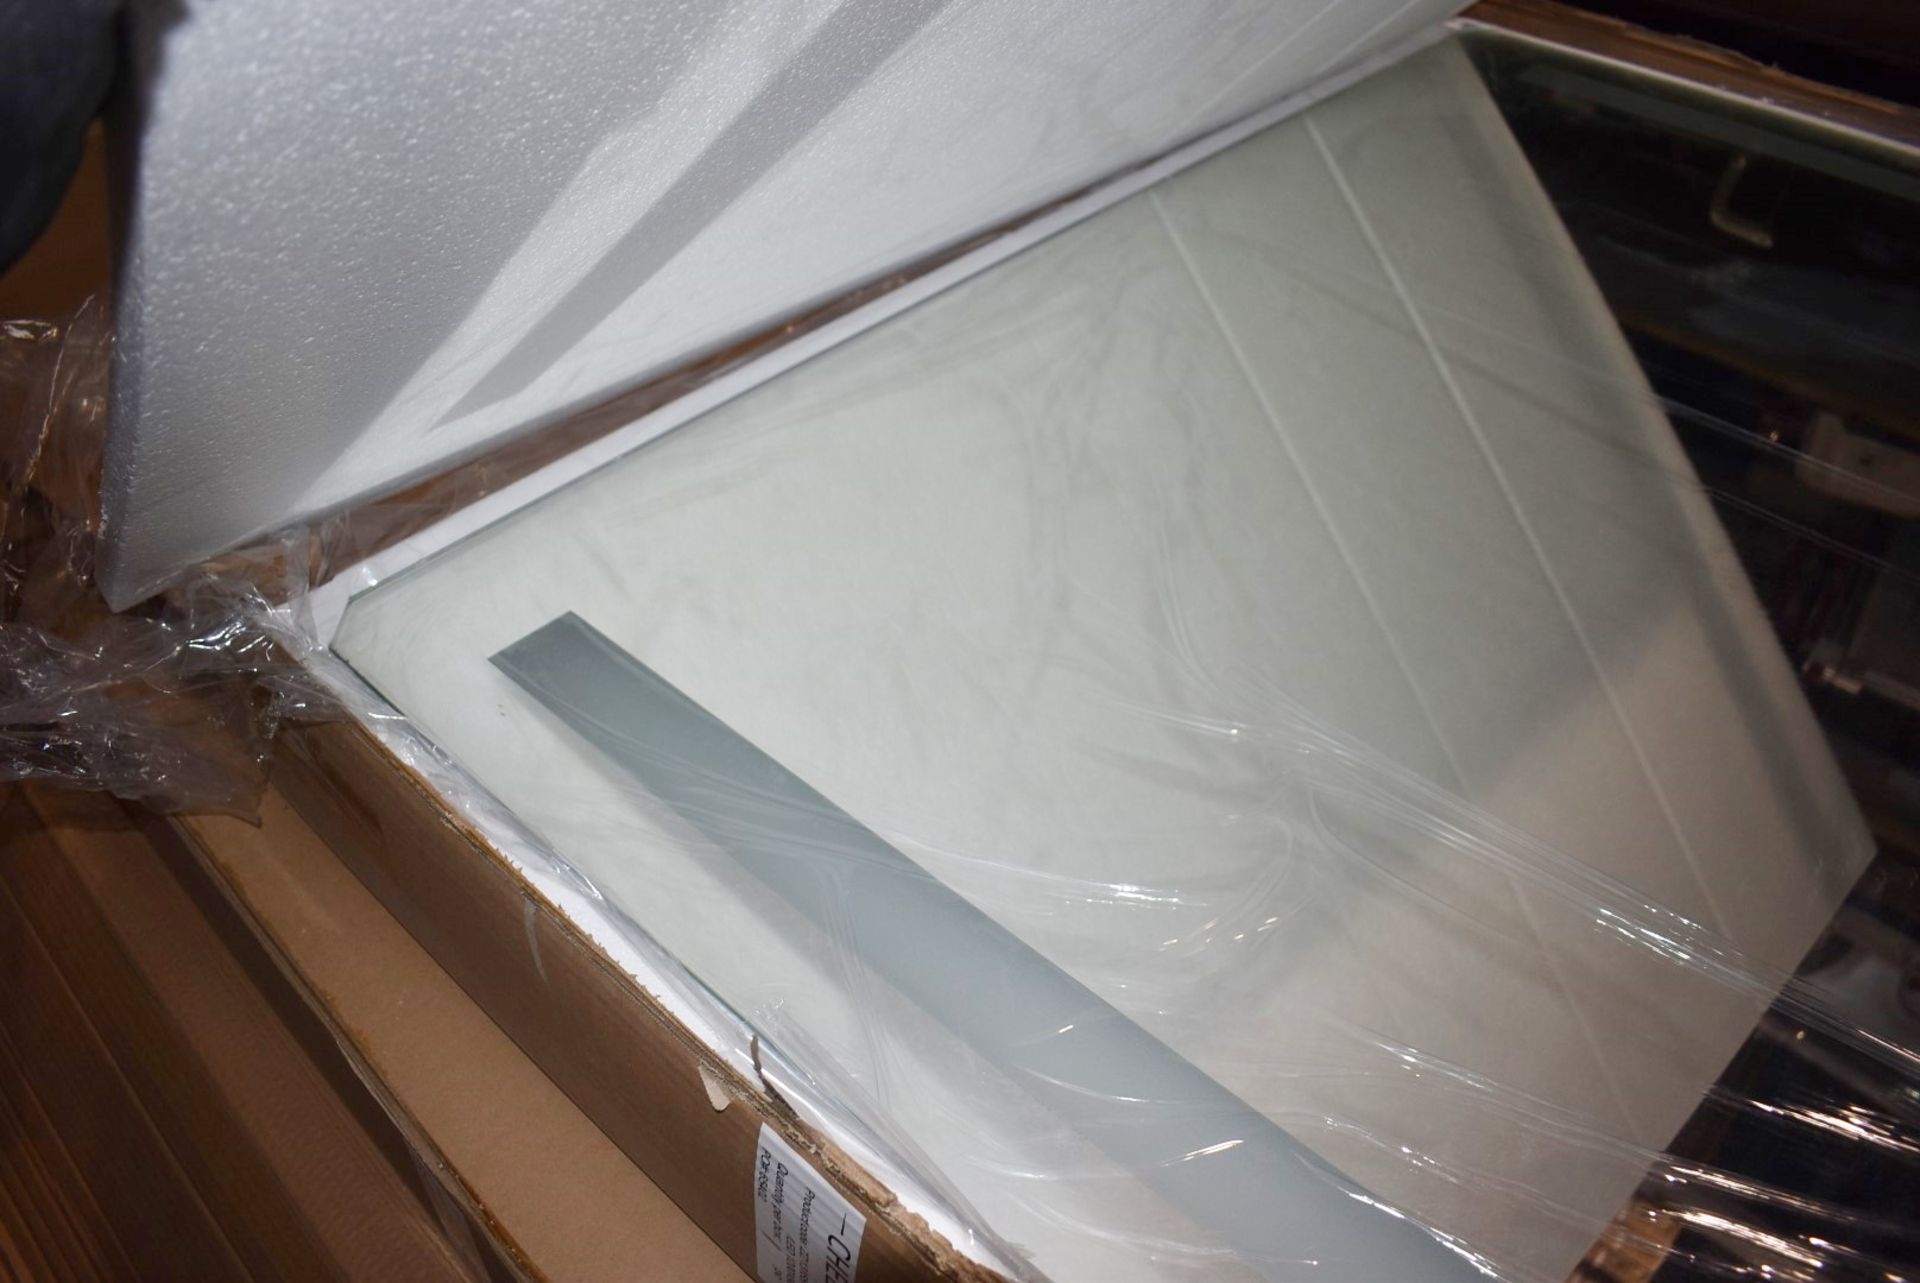 1 x Chelsom Large Illuminated LED Bathroom Mirror With Demister - Brand New Stock - As Used in Major - Image 8 of 13